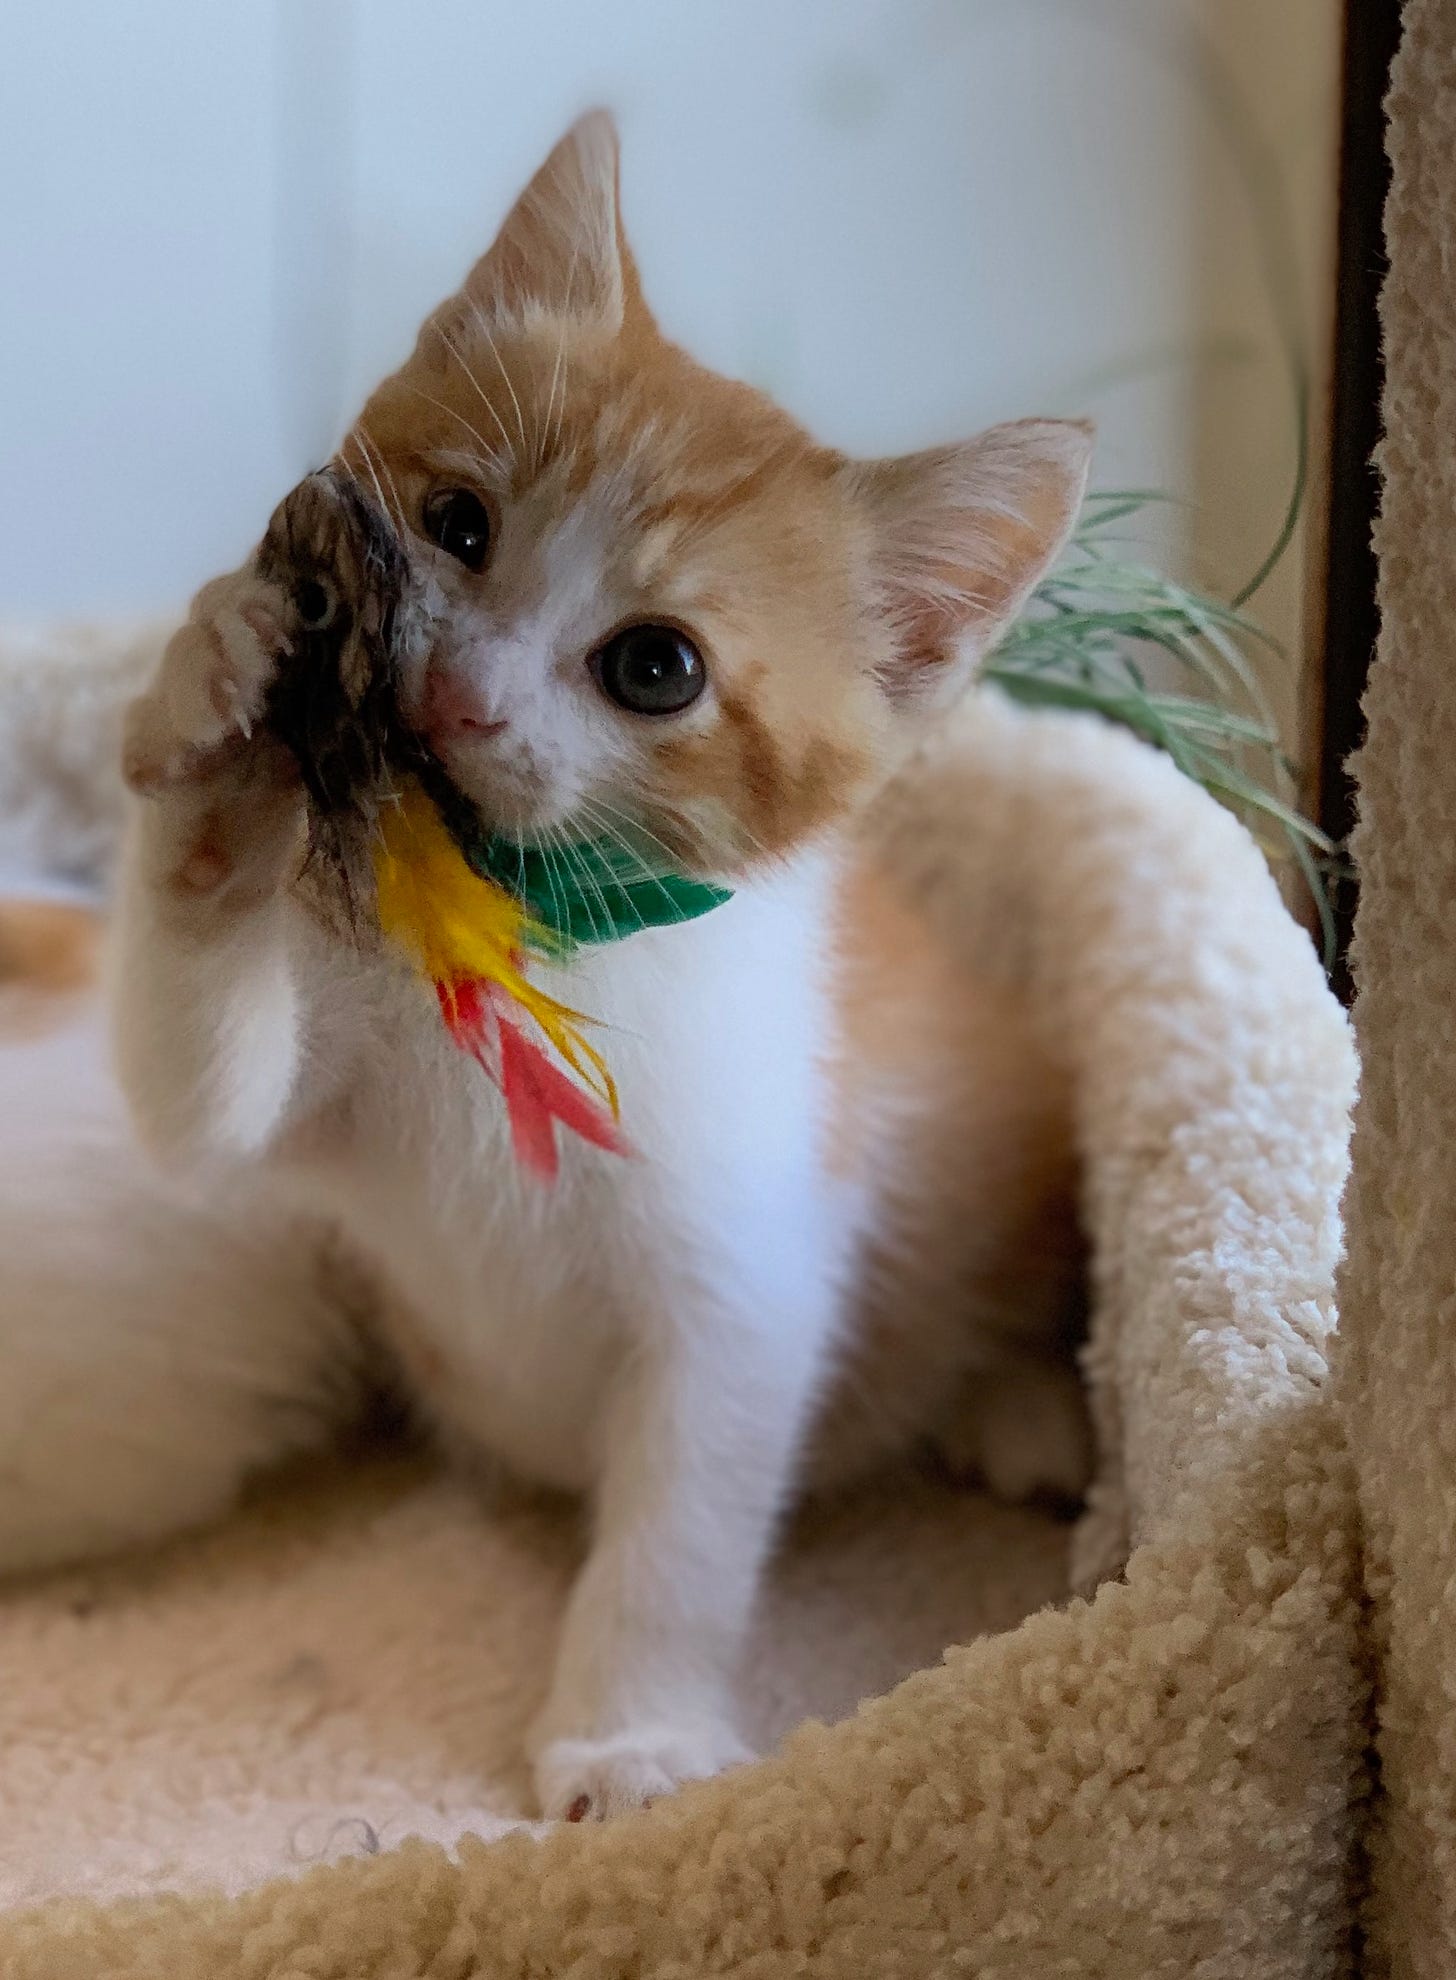 A kitten playing with a feather toy